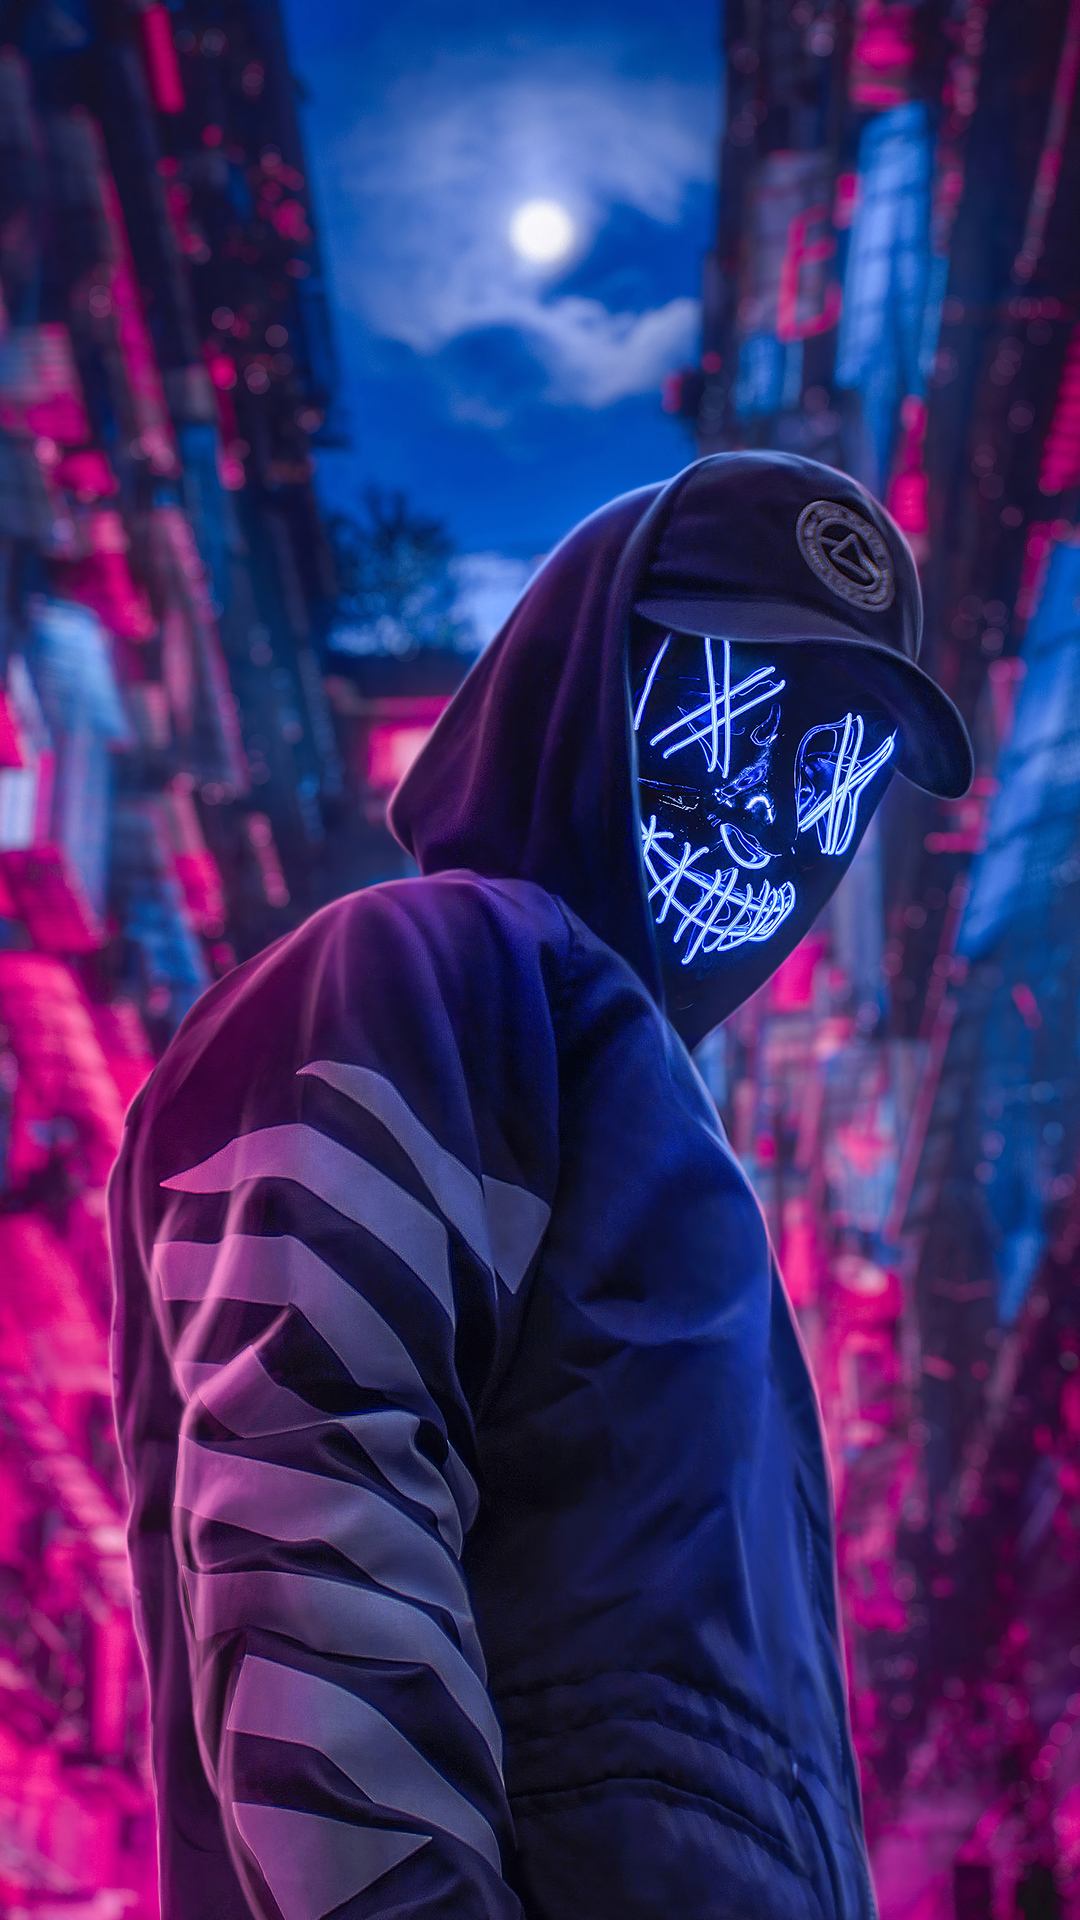 Neon Hoodie Hat Guy Wallpaper - Cool Wallpapers For Boys , HD Wallpaper & Backgrounds